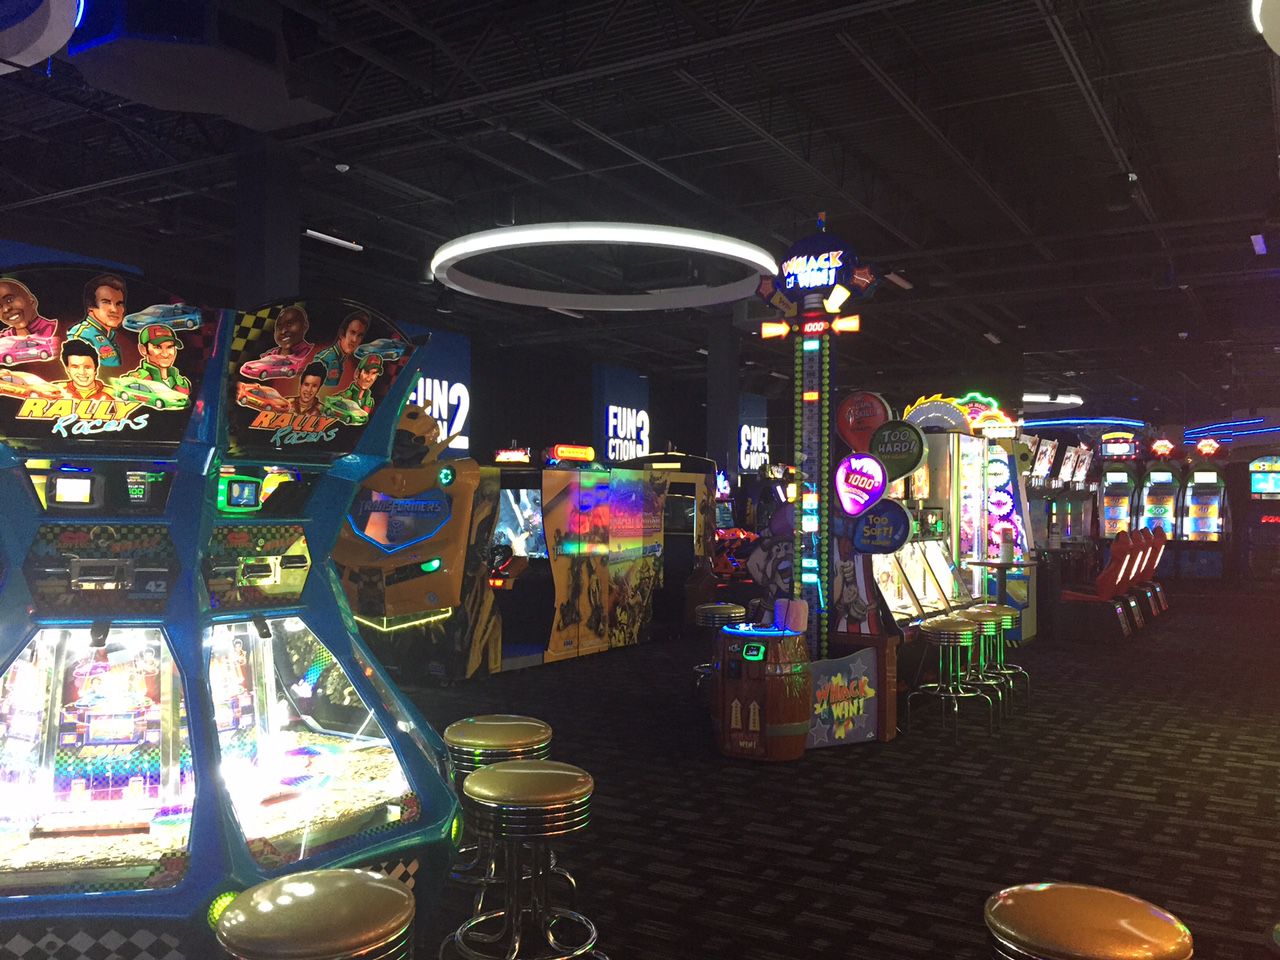 Play Games - Arcade, tabletop, and more, Dave and Buster's